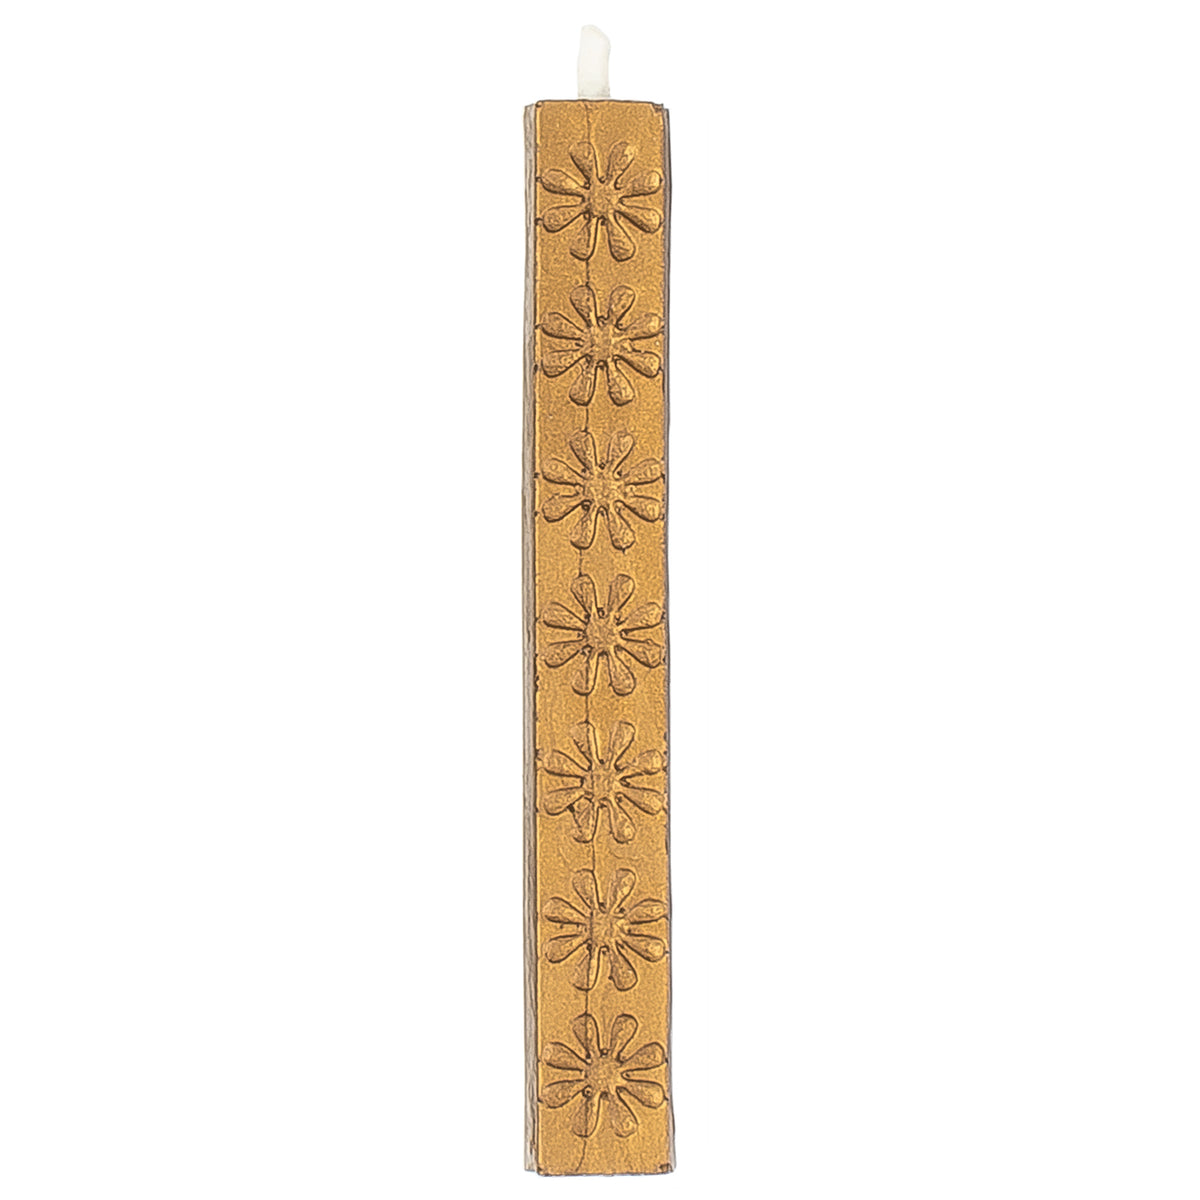 Global Solutions Wax Seal Stick - Antique Gold